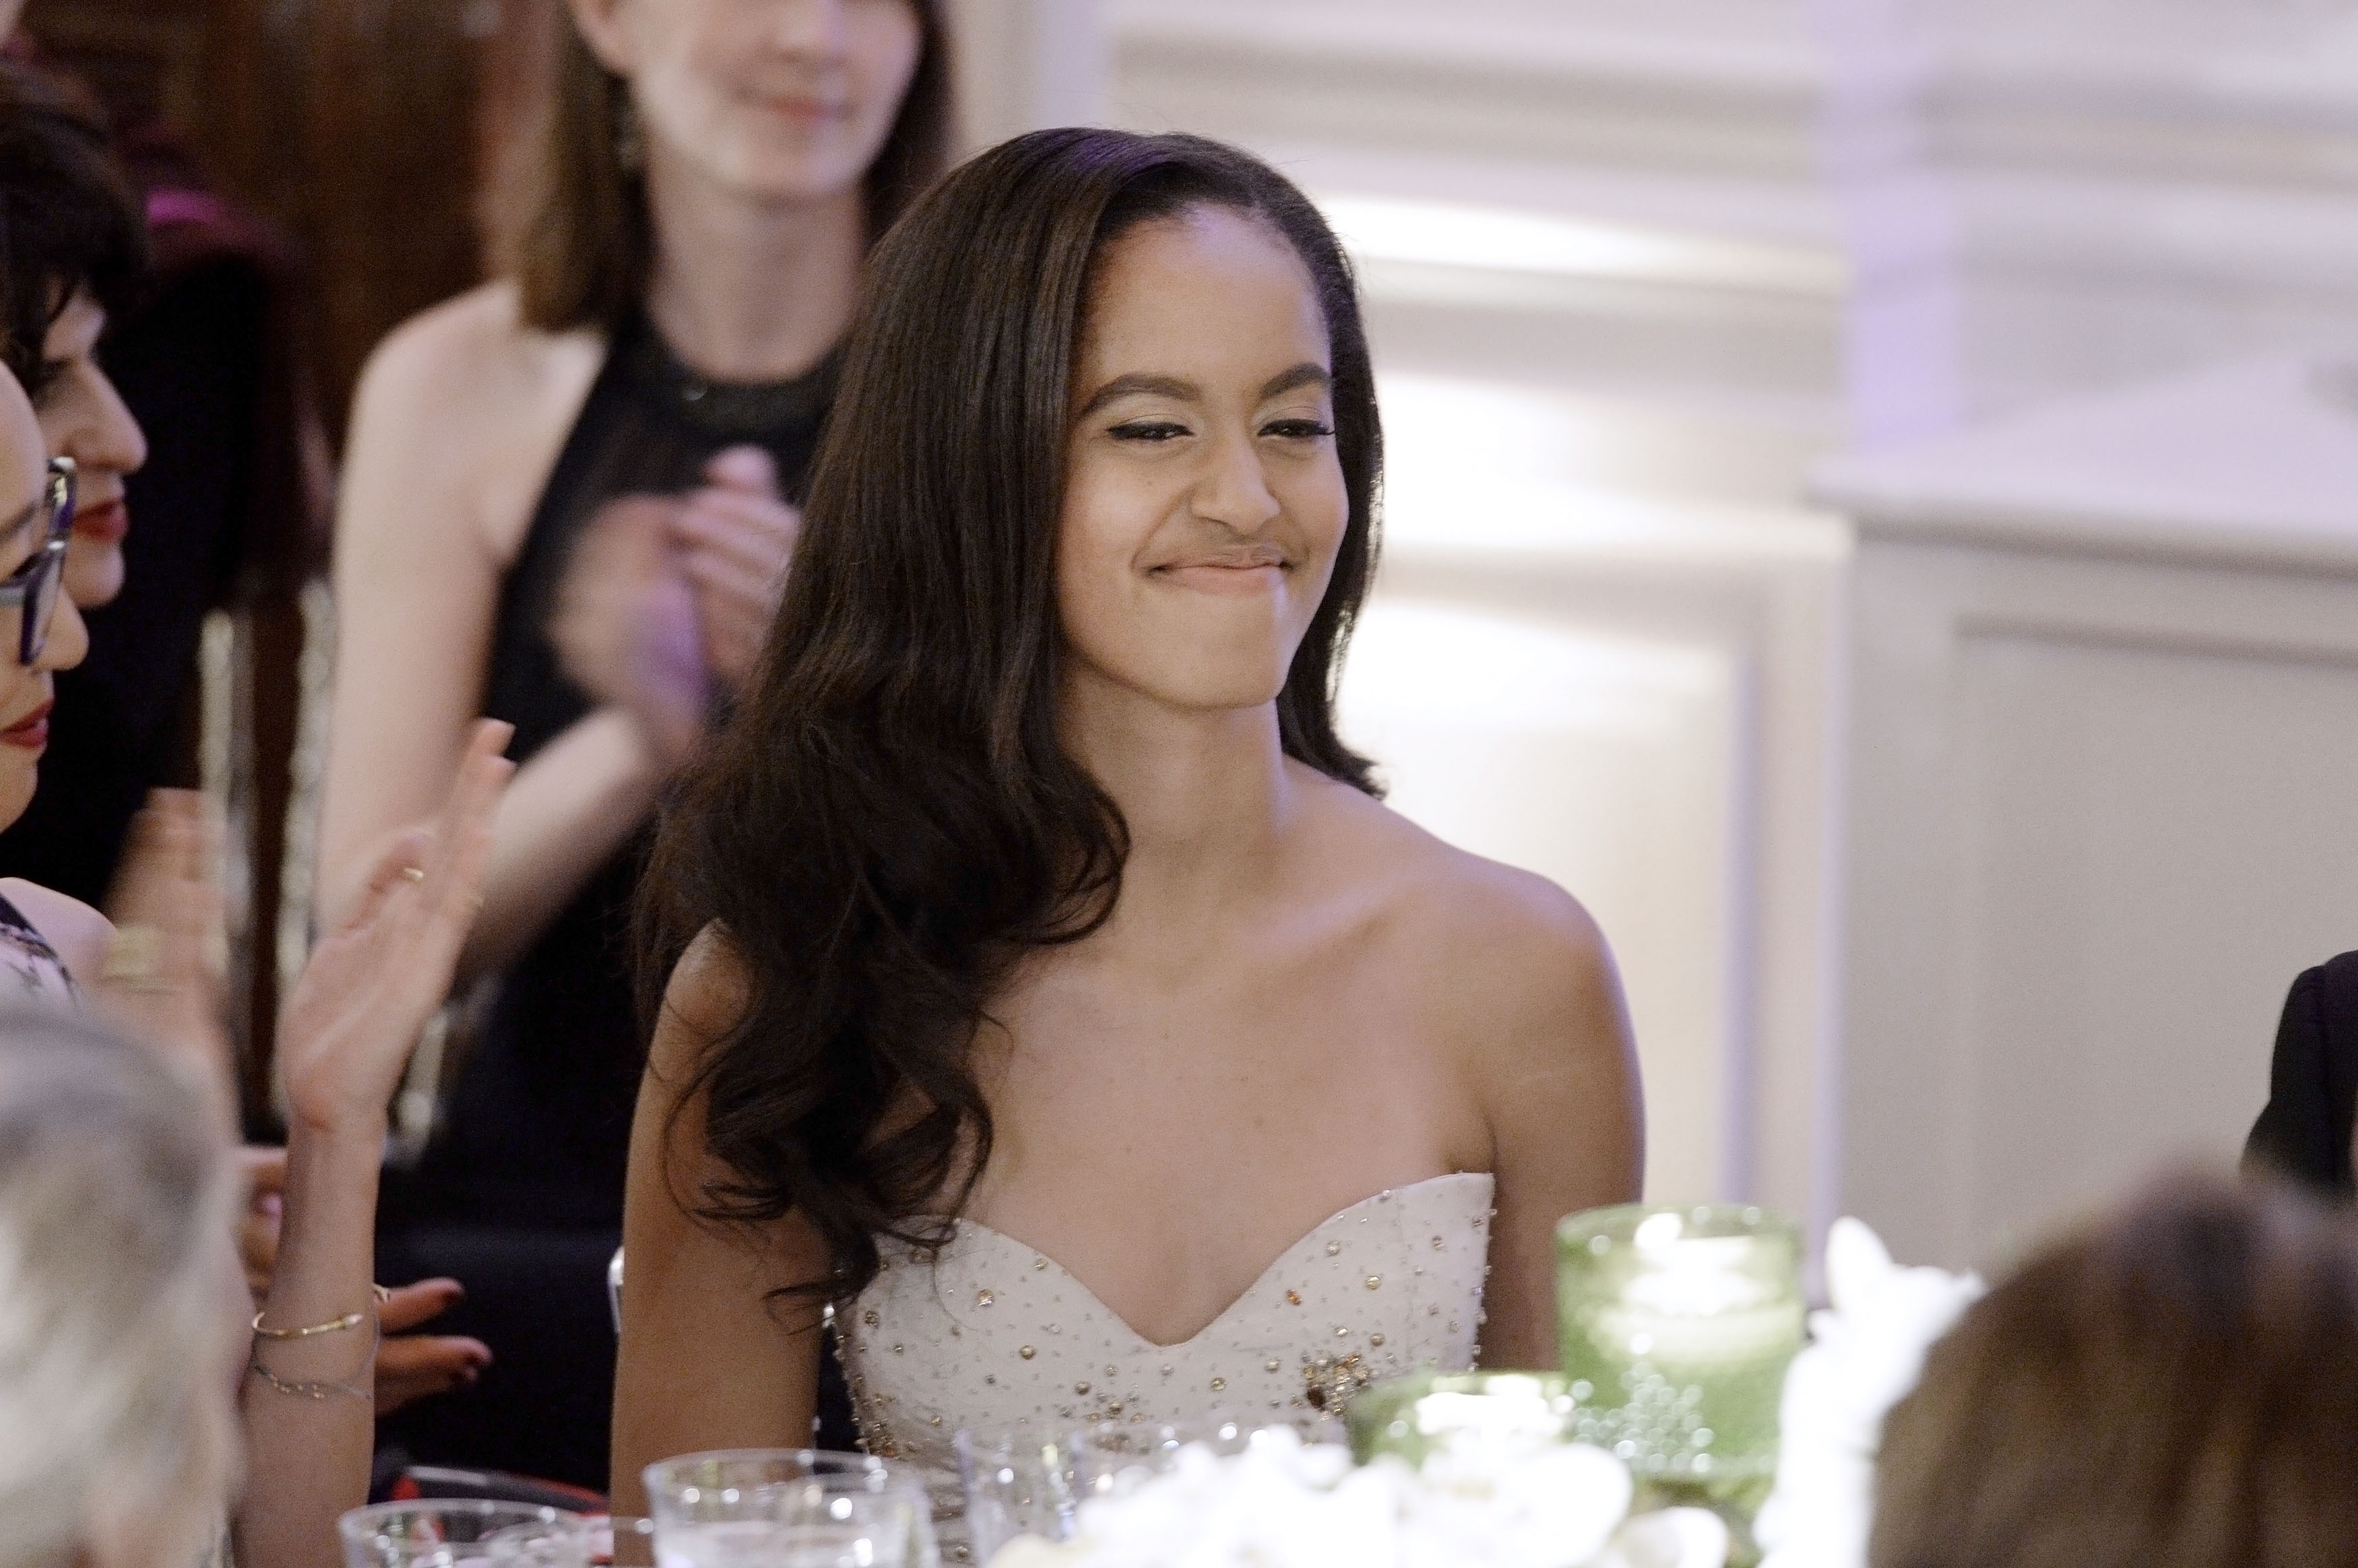 WASHINGTON, DC - MARCH 10: Malia Obama attends a State Dinner at the White House March 10, 2016 in Washington, D.C. Hosted by President and First Lady Obama, the dinner is in honor of Prime Minister Justin Trudeau and First Lady Sophie Gregoire Trudeau of Canada. (Photo by Olivier Douliery-Pool/Getty Images)